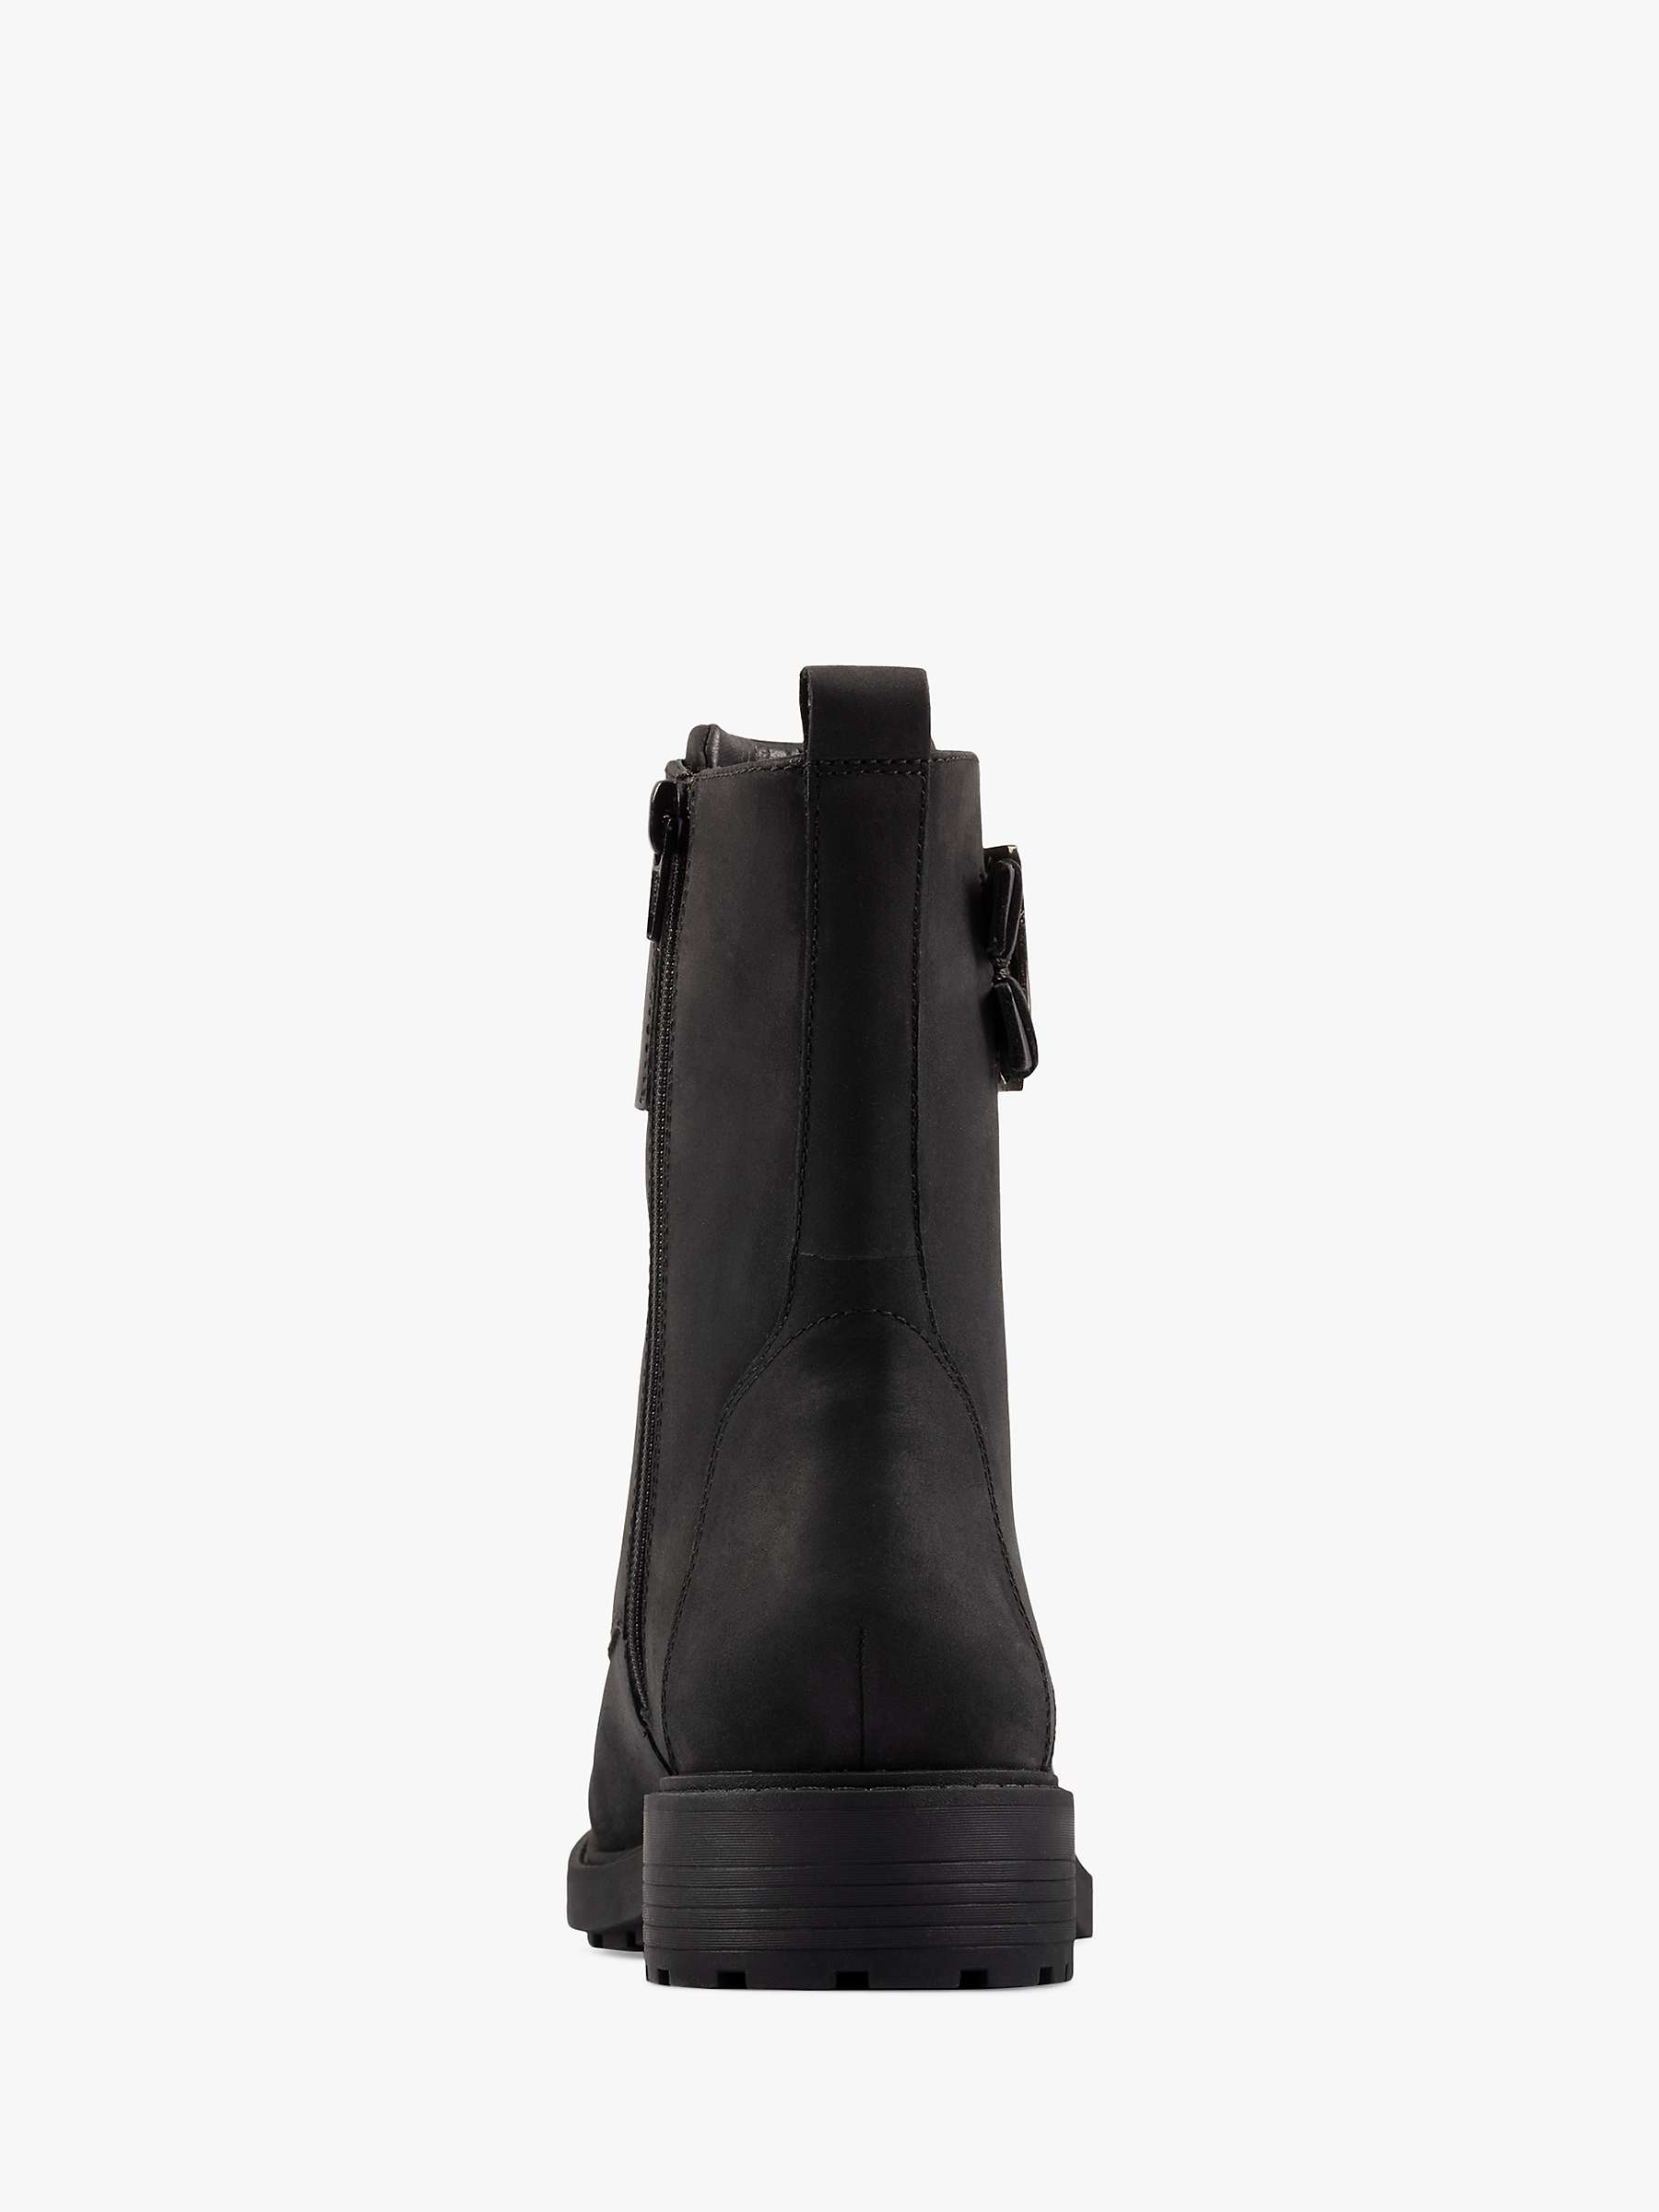 Buy Clarks Orinoco 2 Leather Lace Up Ankle Boots Online at johnlewis.com